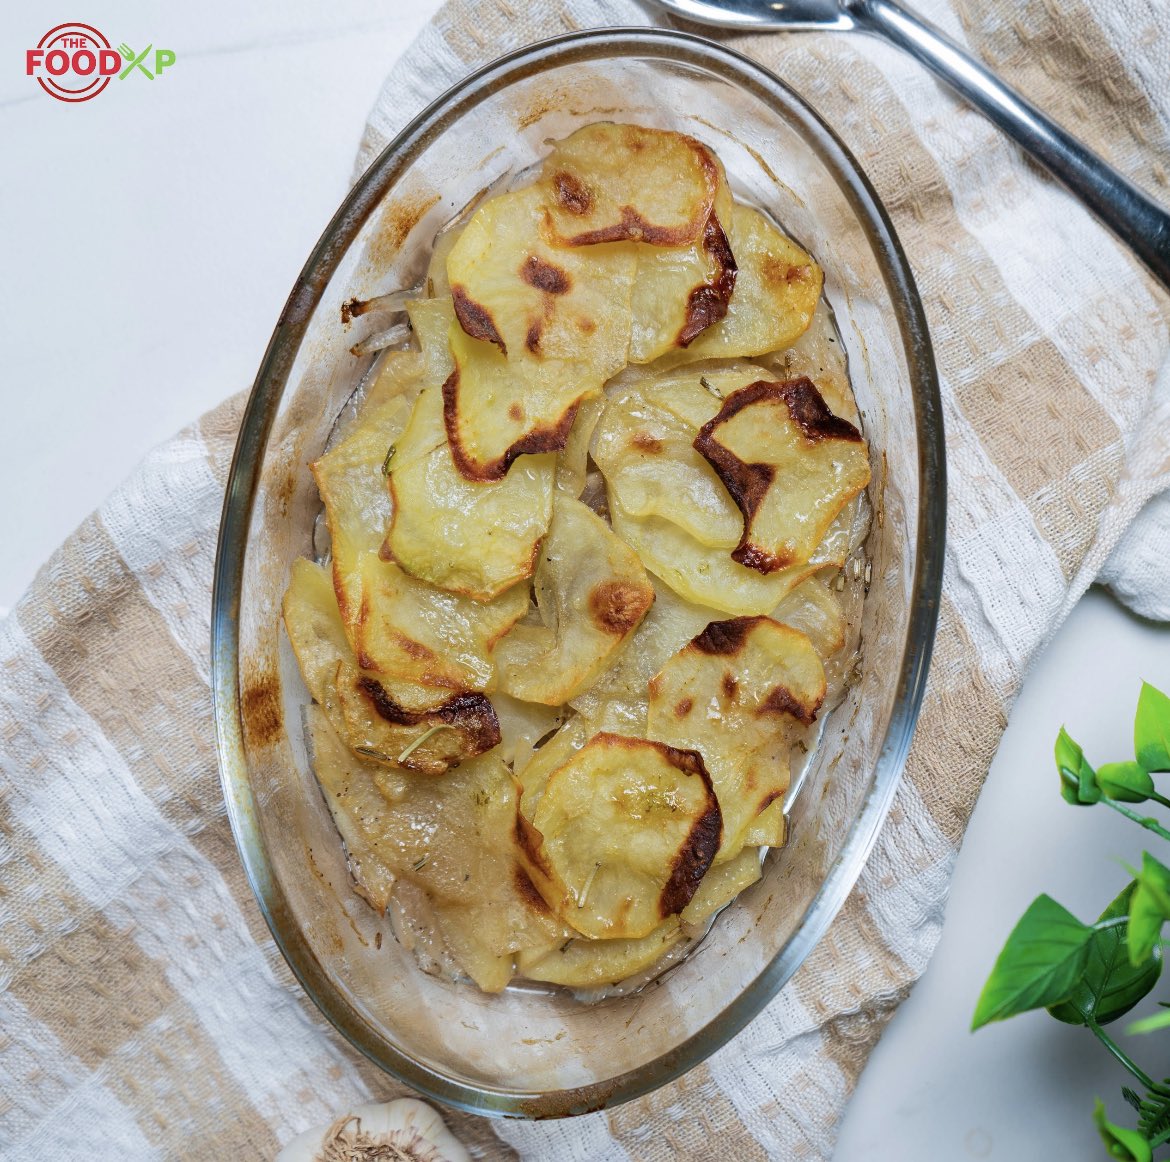 Want to jazz up your potatoes? Well, we have a great recipe for you. Just wait a while for Gordon Ramsay’s potato boulangere recipe. 
#thefoodxp #gordonramsay https://t.co/sR7LSPMQWs